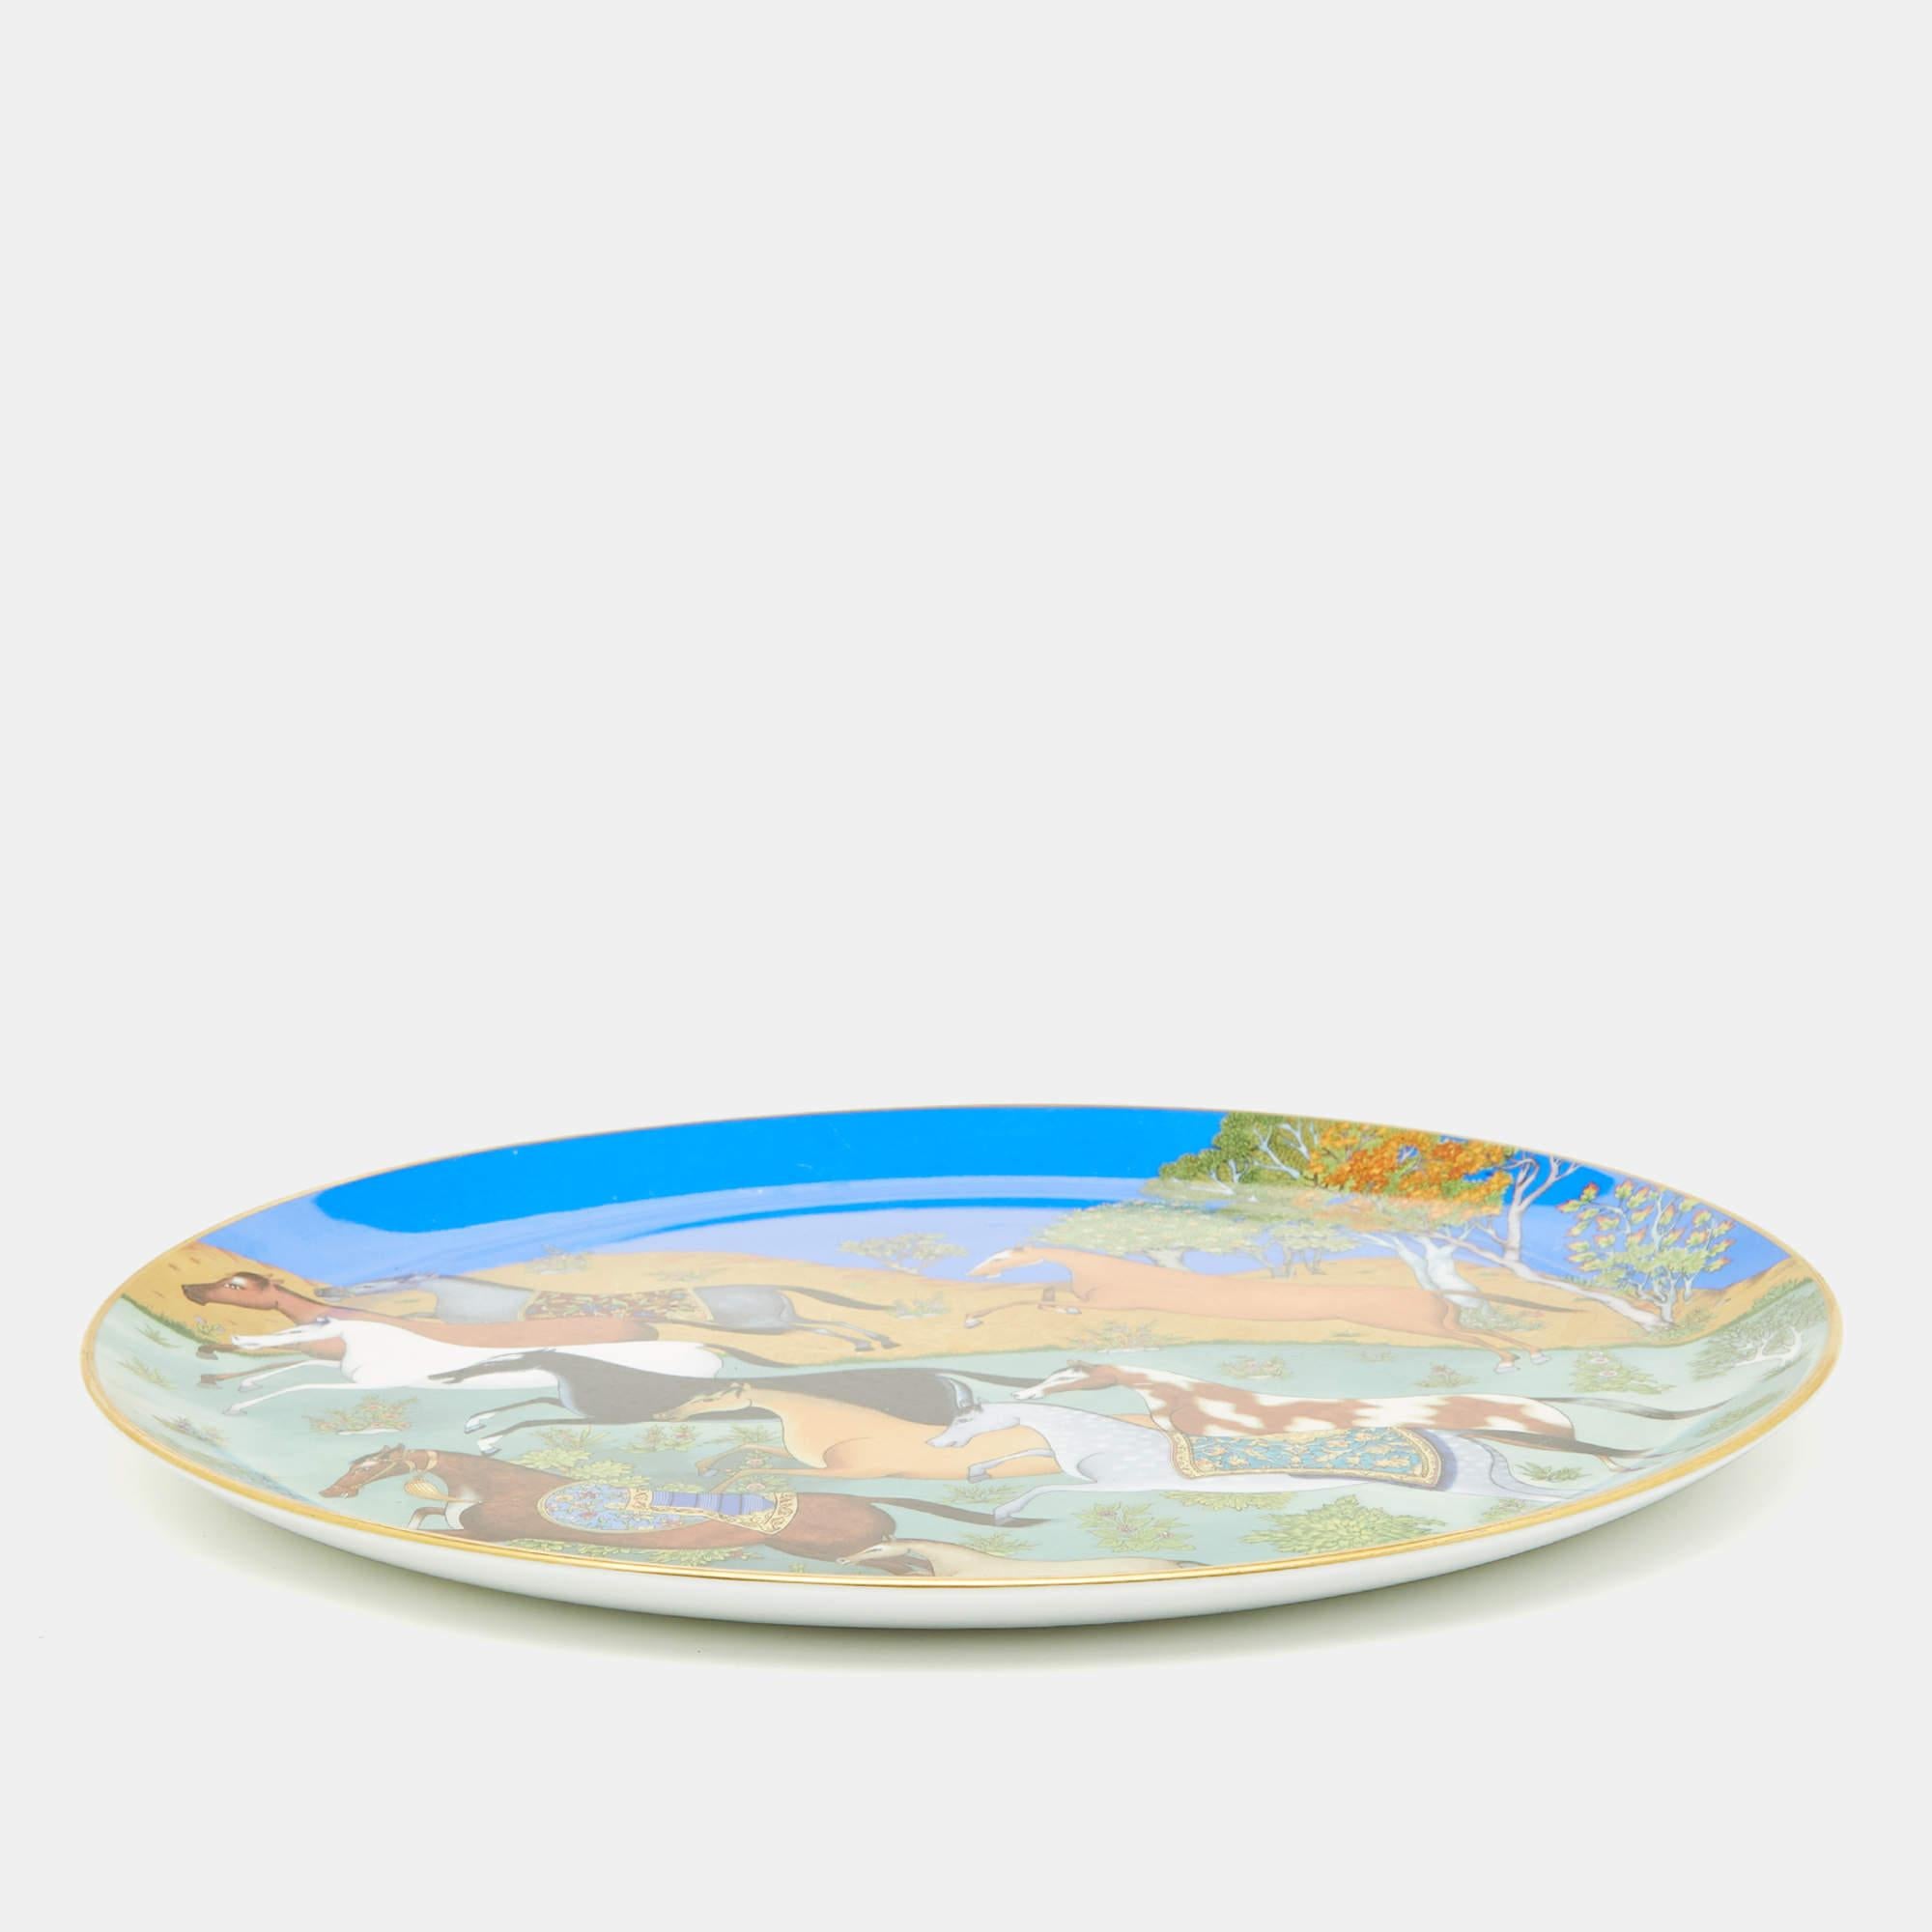 The Hermès tart platter showcases a captivating blend of vivid hues and intricate details. Featuring a striking Cheval d'Orient motif, this exquisite platter exudes elegance. Its delicate porcelain construction makes it a stunning canvas for serving